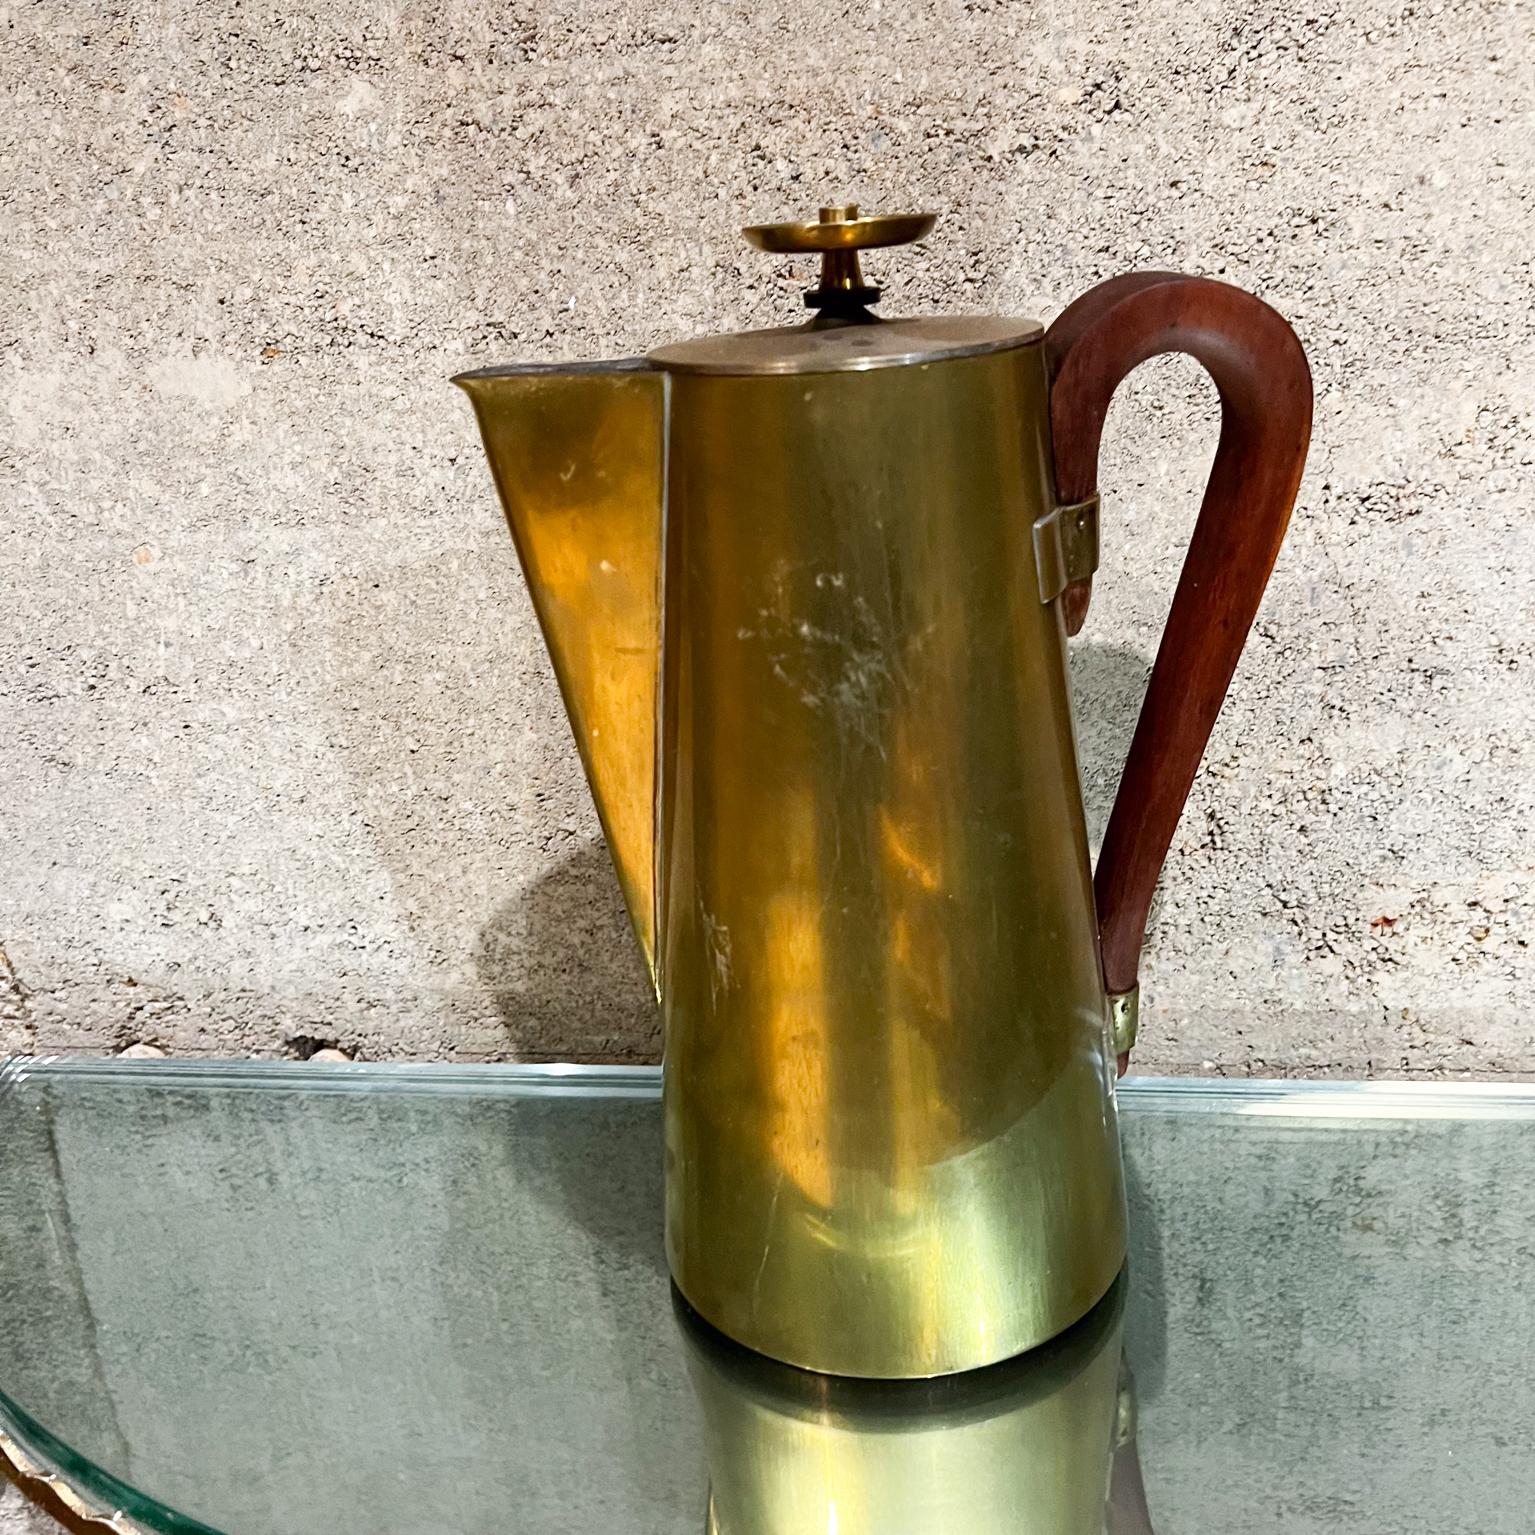 By Designer Tommi Parzinger Modern Brass Coffee Tea Service Pot with silverplate.
Sculptural Walnut Wood handle.
Stamped Dorlyn Silversmiths.
12 tall x 8.5 d x 5.5 diameter
Unrestored original vintage condition with patina present
Refer to all